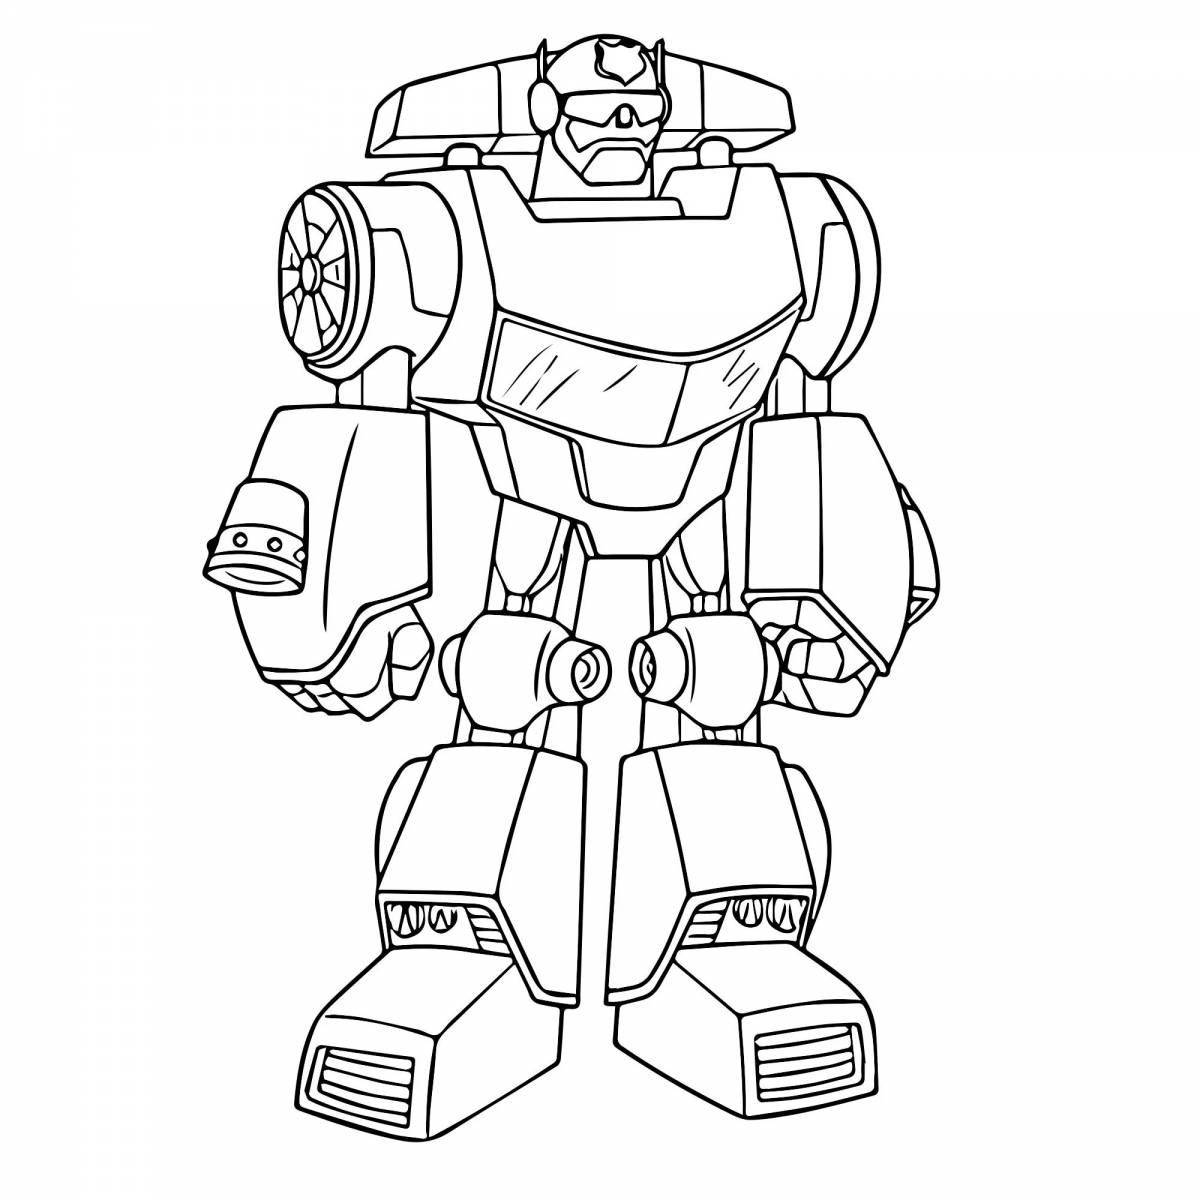 Giga 7 playful coloring page